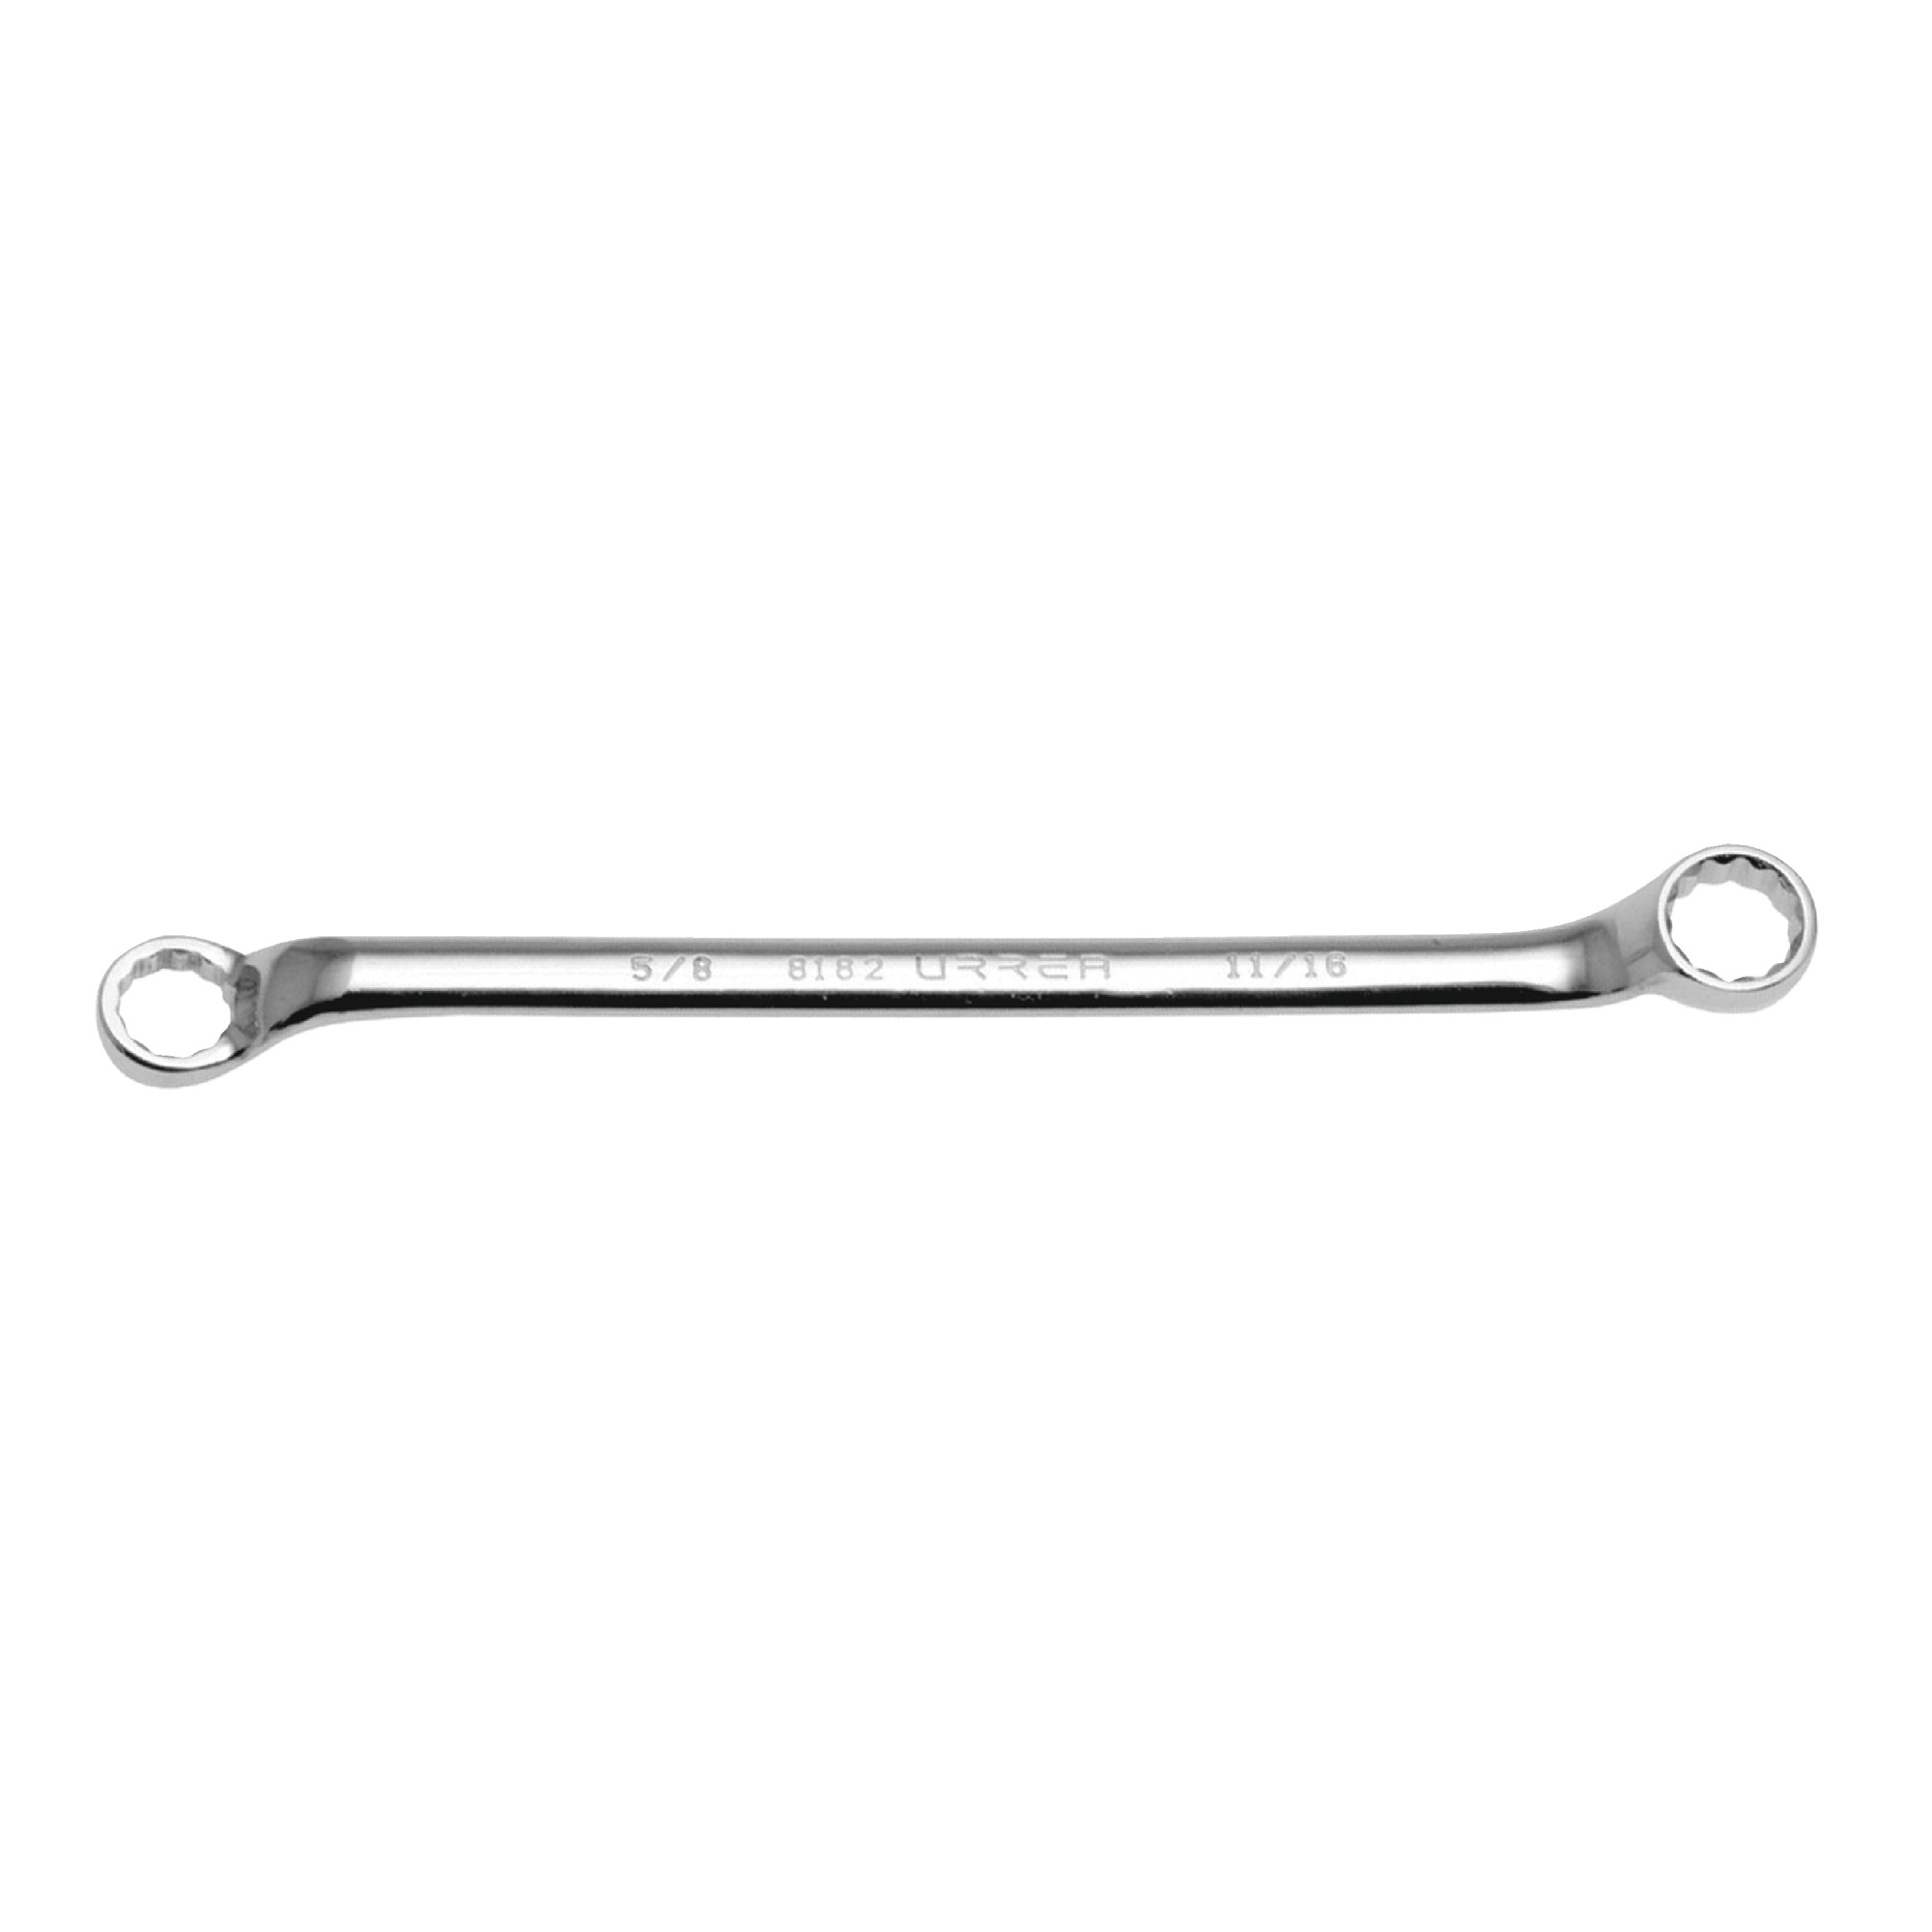 81011 10mmx 11mm Chrome Finish 12 Point Box Wrench